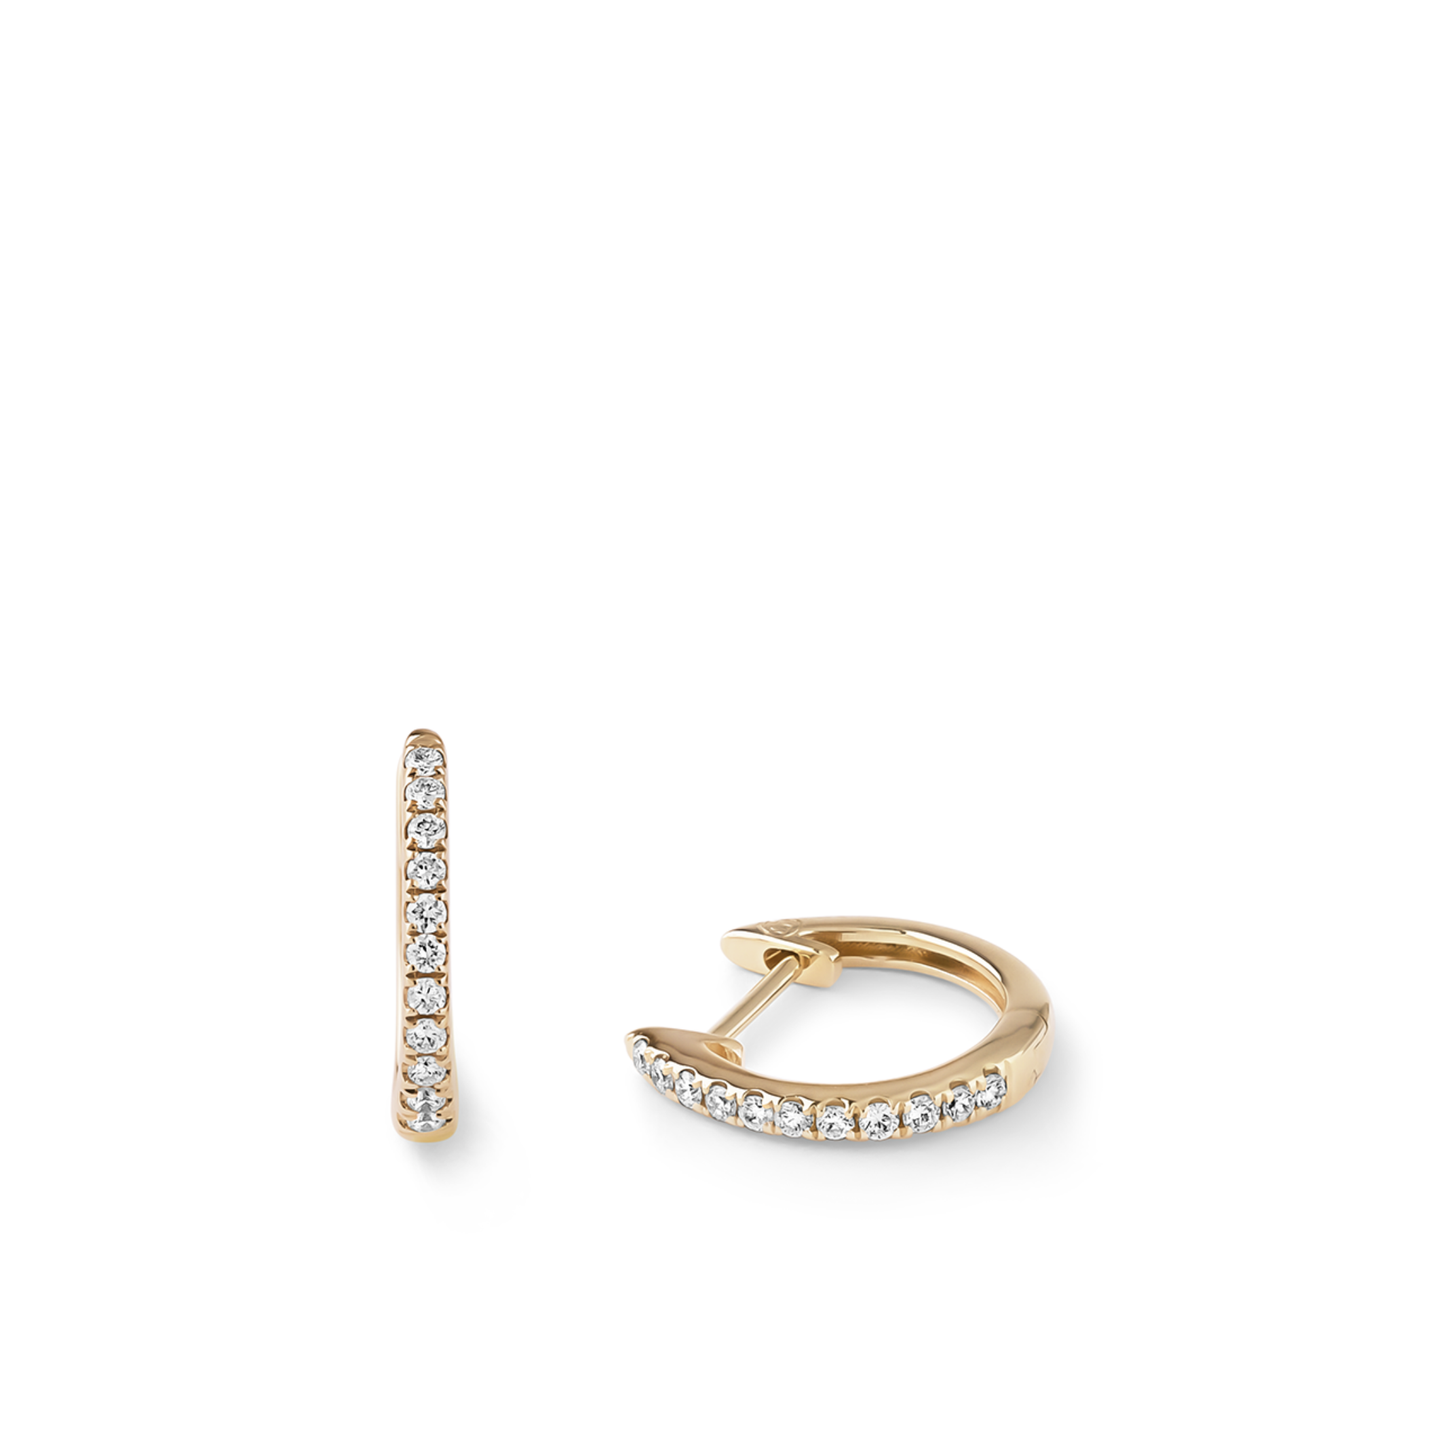 Oliver Heemeyer Kate Mini Diamond Hoops 11,0 mm made of 18k yellow gold.